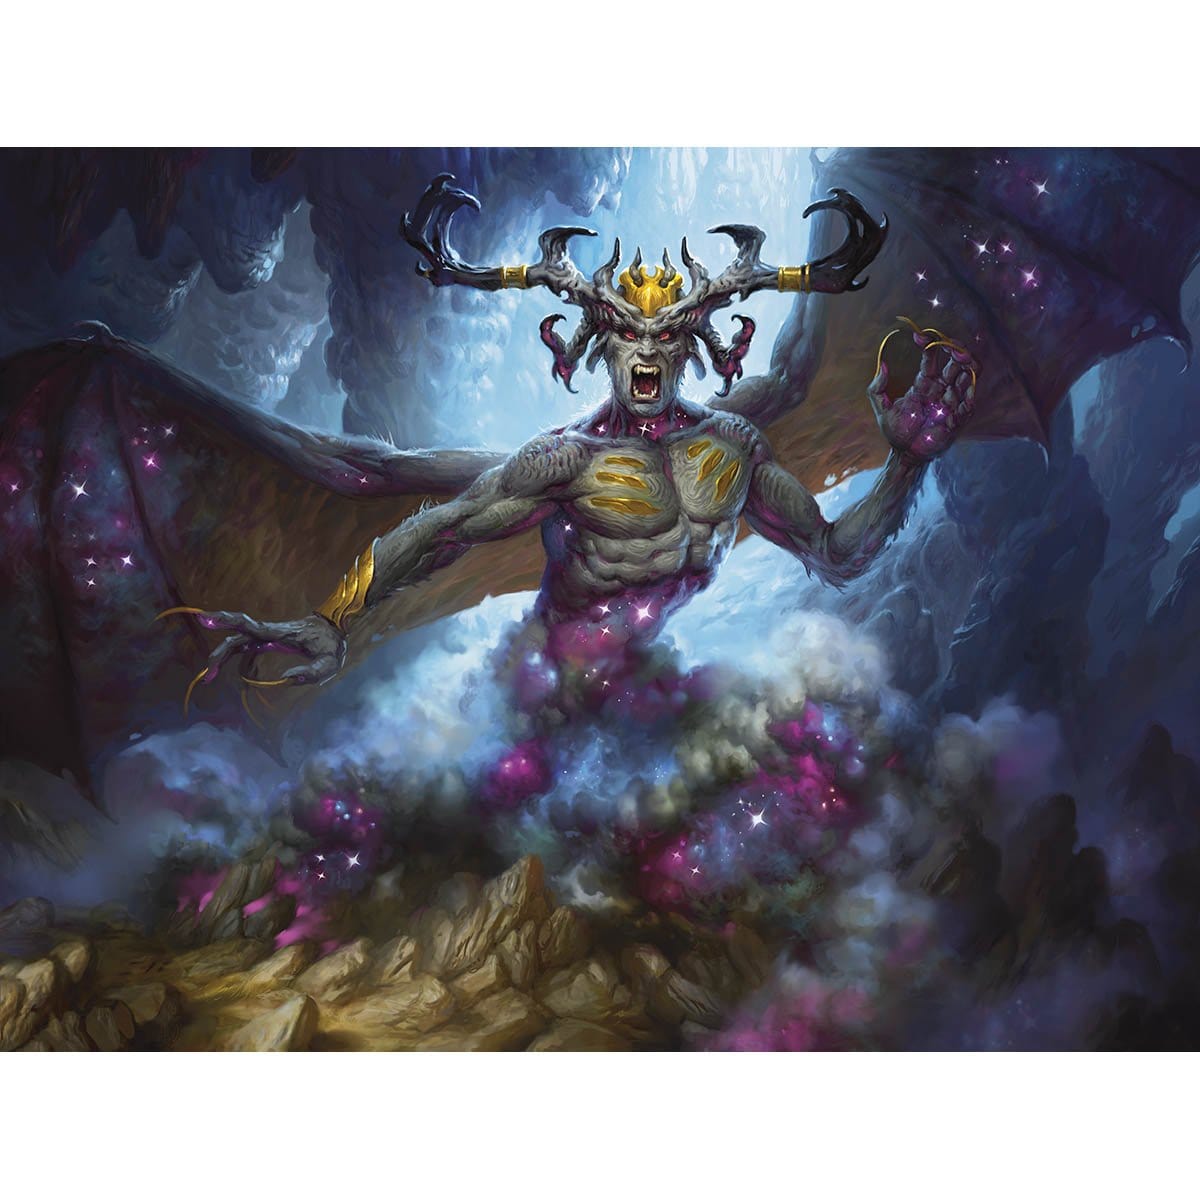 Daxos’s Torment Print - Print - Original Magic Art - Accessories for Magic the Gathering and other card games